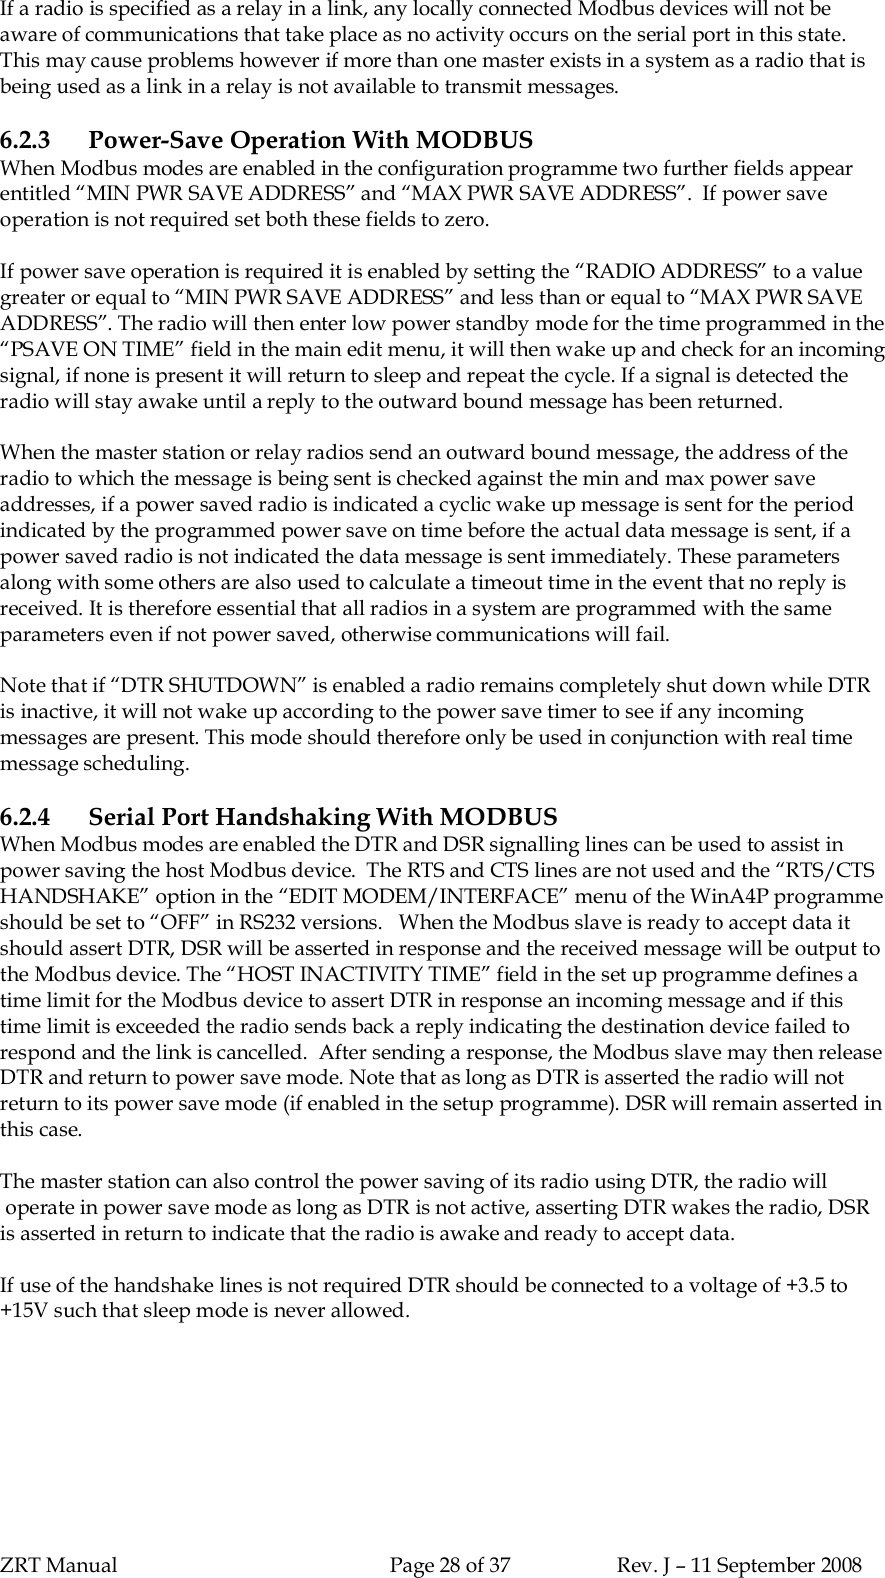 ZRT Manual Page 28 of 37 Rev. J – 11 September 2008If a radio is specified as a relay in a link, any locally connected Modbus devices will not beaware of communications that take place as no activity occurs on the serial port in this state.This may cause problems however if more than one master exists in a system as a radio that isbeing used as a link in a relay is not available to transmit messages.6.2.3 Power-Save Operation With MODBUSWhen Modbus modes are enabled in the configuration programme two further fields appearentitled “MIN PWR SAVE ADDRESS” and “MAX PWR SAVE ADDRESS”.  If power saveoperation is not required set both these fields to zero.If power save operation is required it is enabled by setting the “RADIO ADDRESS” to a valuegreater or equal to “MIN PWR SAVE ADDRESS” and less than or equal to “MAX PWR SAVEADDRESS”. The radio will then enter low power standby mode for the time programmed in the“PSAVE ON TIME” field in the main edit menu, it will then wake up and check for an incomingsignal, if none is present it will return to sleep and repeat the cycle. If a signal is detected theradio will stay awake until a reply to the outward bound message has been returned.When the master station or relay radios send an outward bound message, the address of theradio to which the message is being sent is checked against the min and max power saveaddresses, if a power saved radio is indicated a cyclic wake up message is sent for the periodindicated by the programmed power save on time before the actual data message is sent, if apower saved radio is not indicated the data message is sent immediately. These parametersalong with some others are also used to calculate a timeout time in the event that no reply isreceived. It is therefore essential that all radios in a system are programmed with the sameparameters even if not power saved, otherwise communications will fail.Note that if “DTR SHUTDOWN” is enabled a radio remains completely shut down while DTRis inactive, it will not wake up according to the power save timer to see if any incomingmessages are present. This mode should therefore only be used in conjunction with real timemessage scheduling.6.2.4 Serial Port Handshaking With MODBUSWhen Modbus modes are enabled the DTR and DSR signalling lines can be used to assist inpower saving the host Modbus device.  The RTS and CTS lines are not used and the “RTS/CTSHANDSHAKE” option in the “EDIT MODEM/INTERFACE” menu of the WinA4P programmeshould be set to “OFF” in RS232 versions.   When the Modbus slave is ready to accept data itshould assert DTR, DSR will be asserted in response and the received message will be output tothe Modbus device. The “HOST INACTIVITY TIME” field in the set up programme defines atime limit for the Modbus device to assert DTR in response an incoming message and if thistime limit is exceeded the radio sends back a reply indicating the destination device failed torespond and the link is cancelled.  After sending a response, the Modbus slave may then releaseDTR and return to power save mode. Note that as long as DTR is asserted the radio will notreturn to its power save mode (if enabled in the setup programme). DSR will remain asserted inthis case.The master station can also control the power saving of its radio using DTR, the radio will operate in power save mode as long as DTR is not active, asserting DTR wakes the radio, DSRis asserted in return to indicate that the radio is awake and ready to accept data.If use of the handshake lines is not required DTR should be connected to a voltage of +3.5 to+15V such that sleep mode is never allowed.